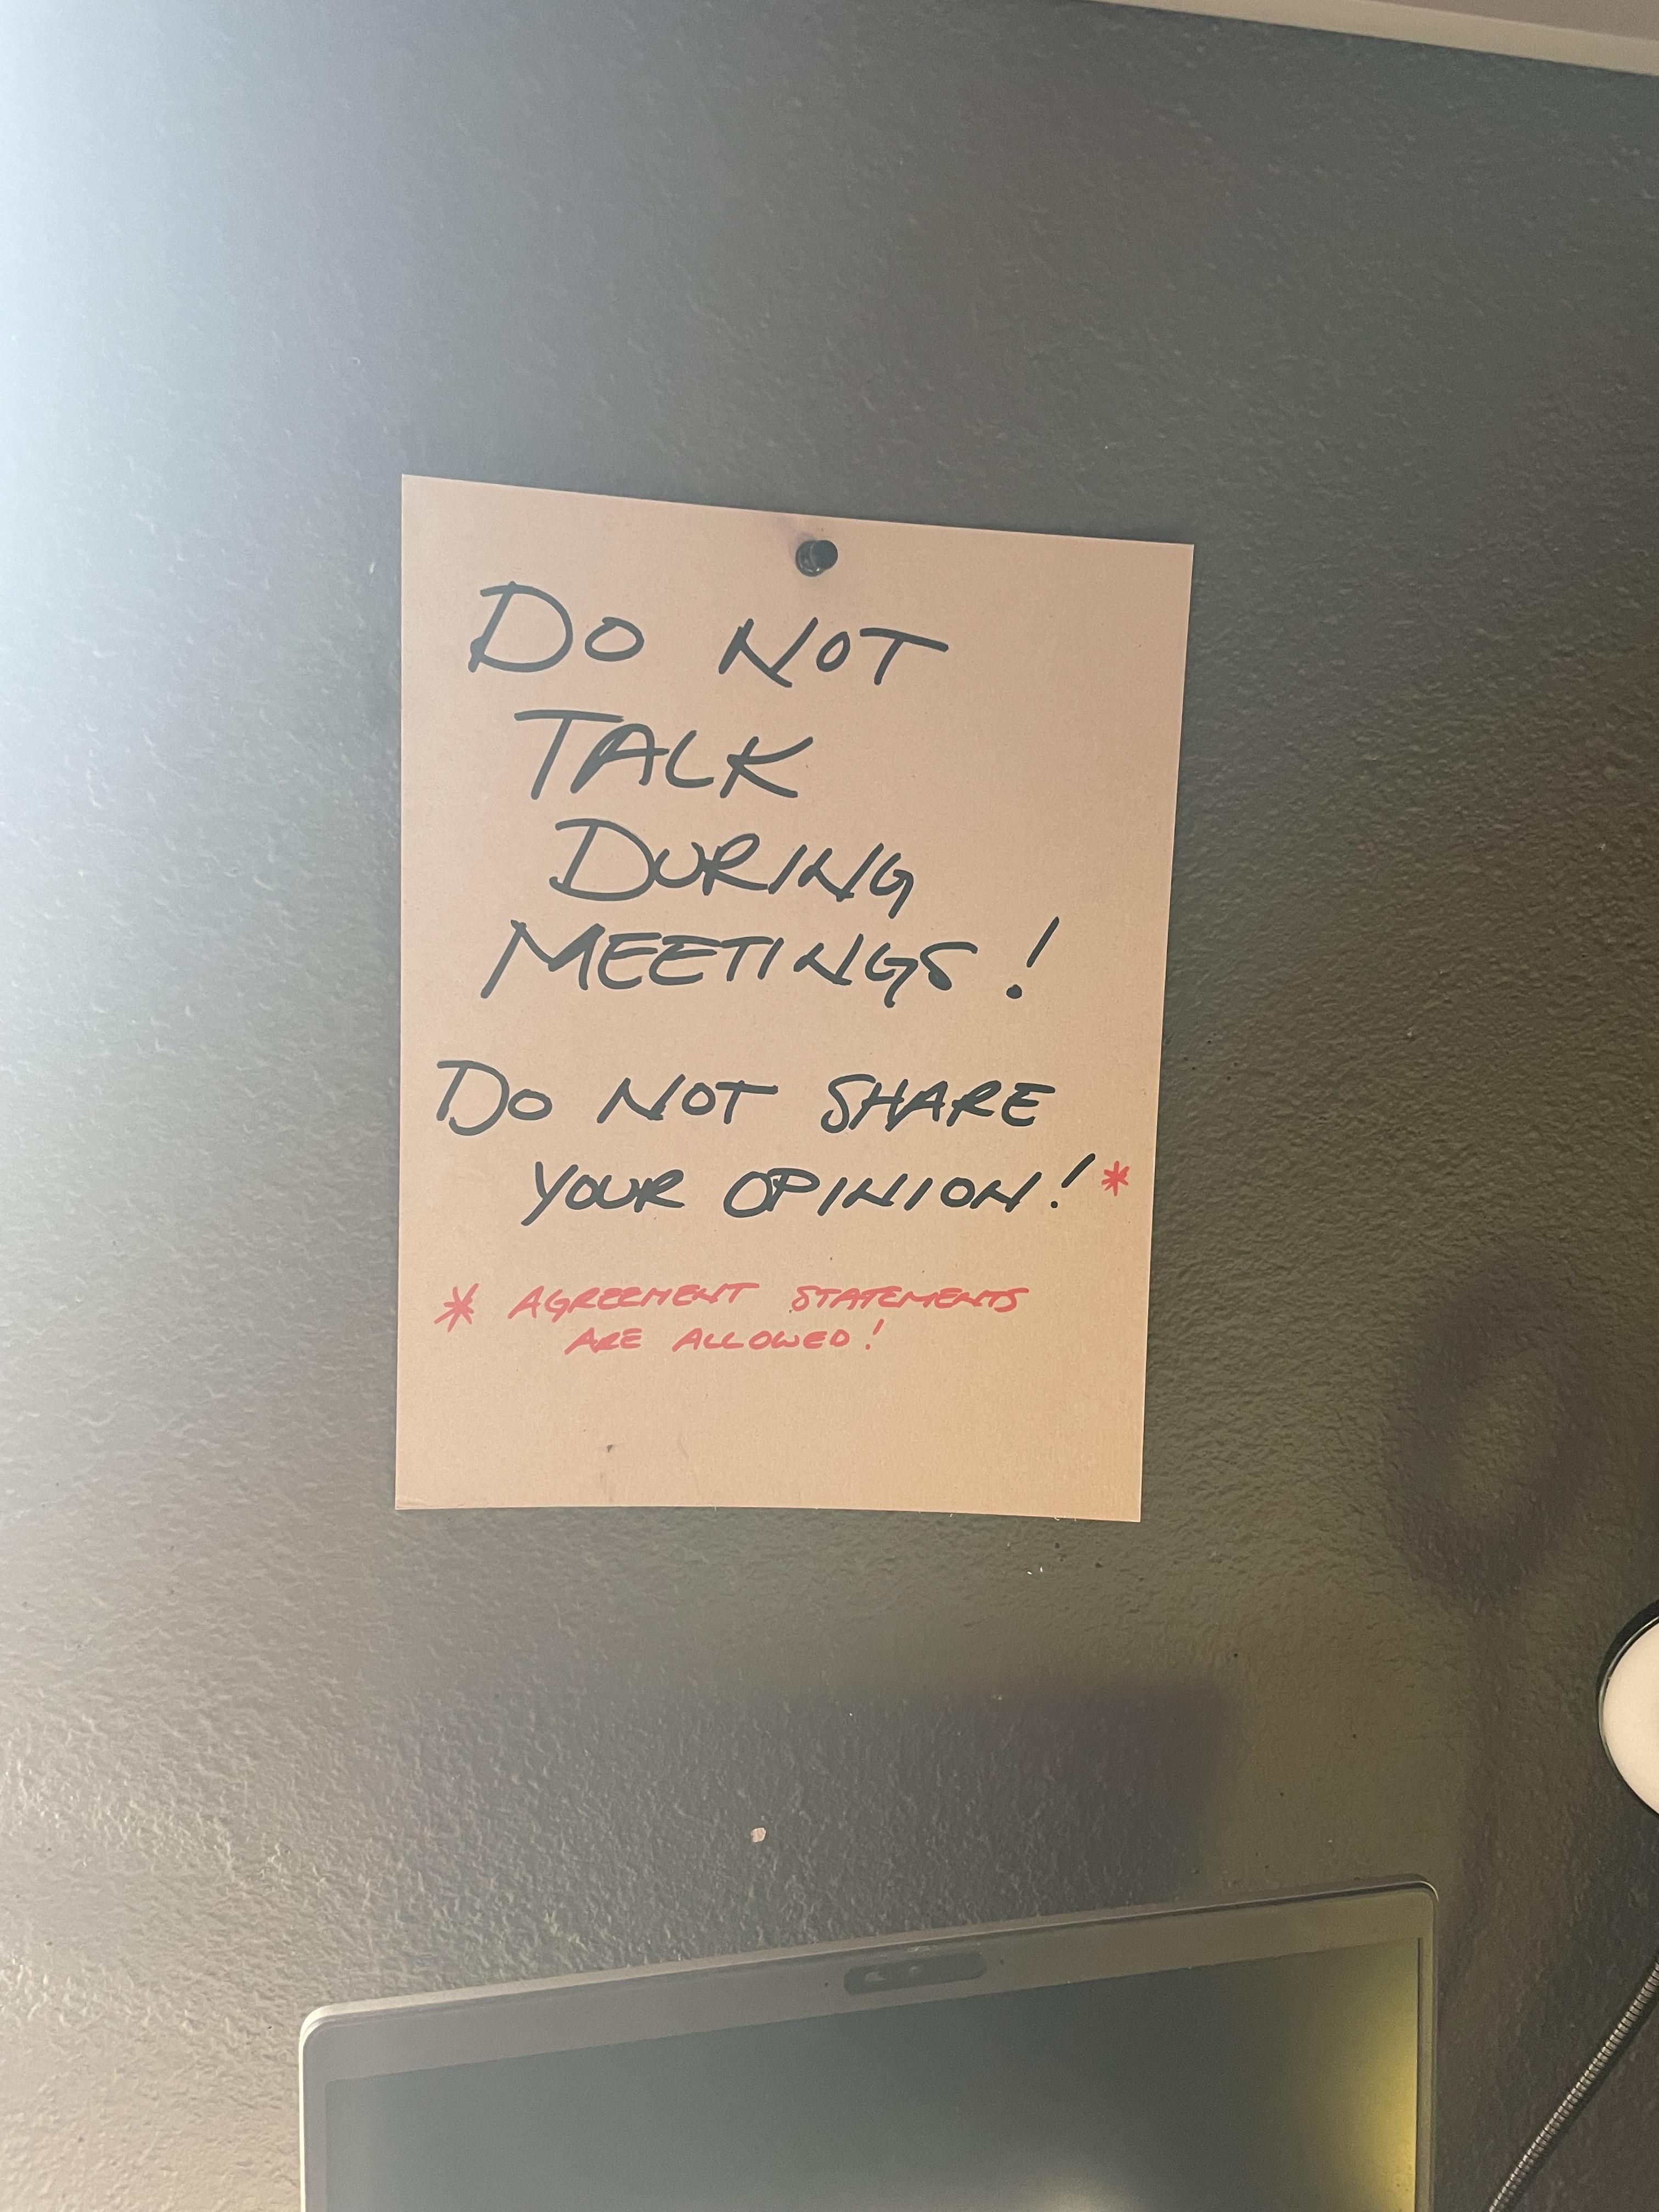 This is pinned above my dad’s computer to remind him not to call coworkers stupid